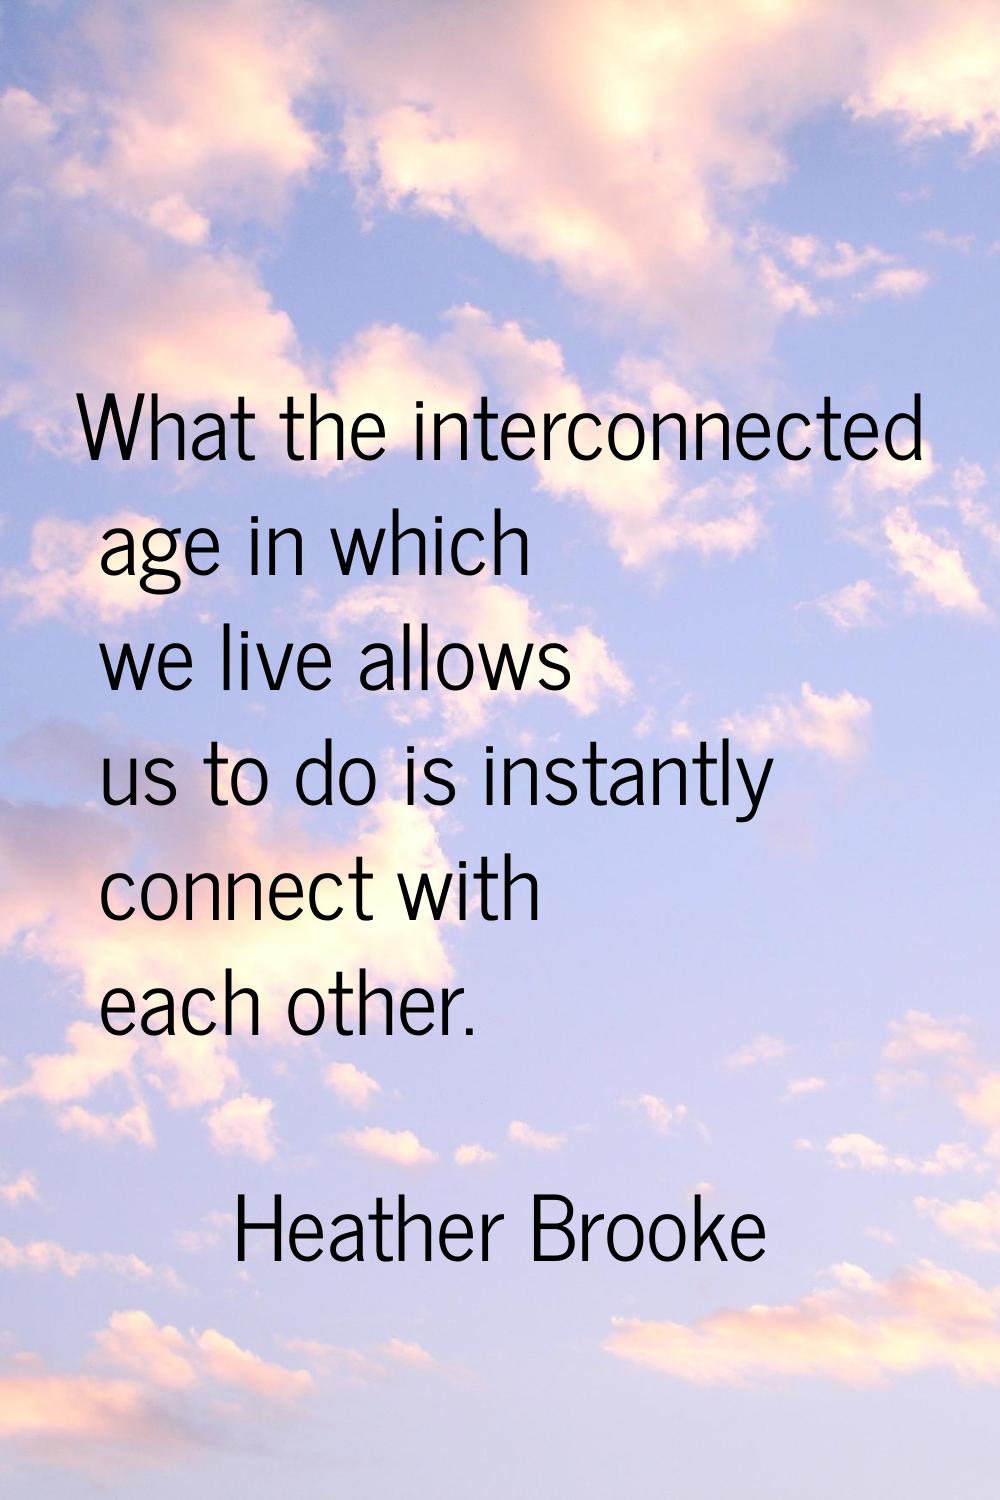 What the interconnected age in which we live allows us to do is instantly connect with each other.